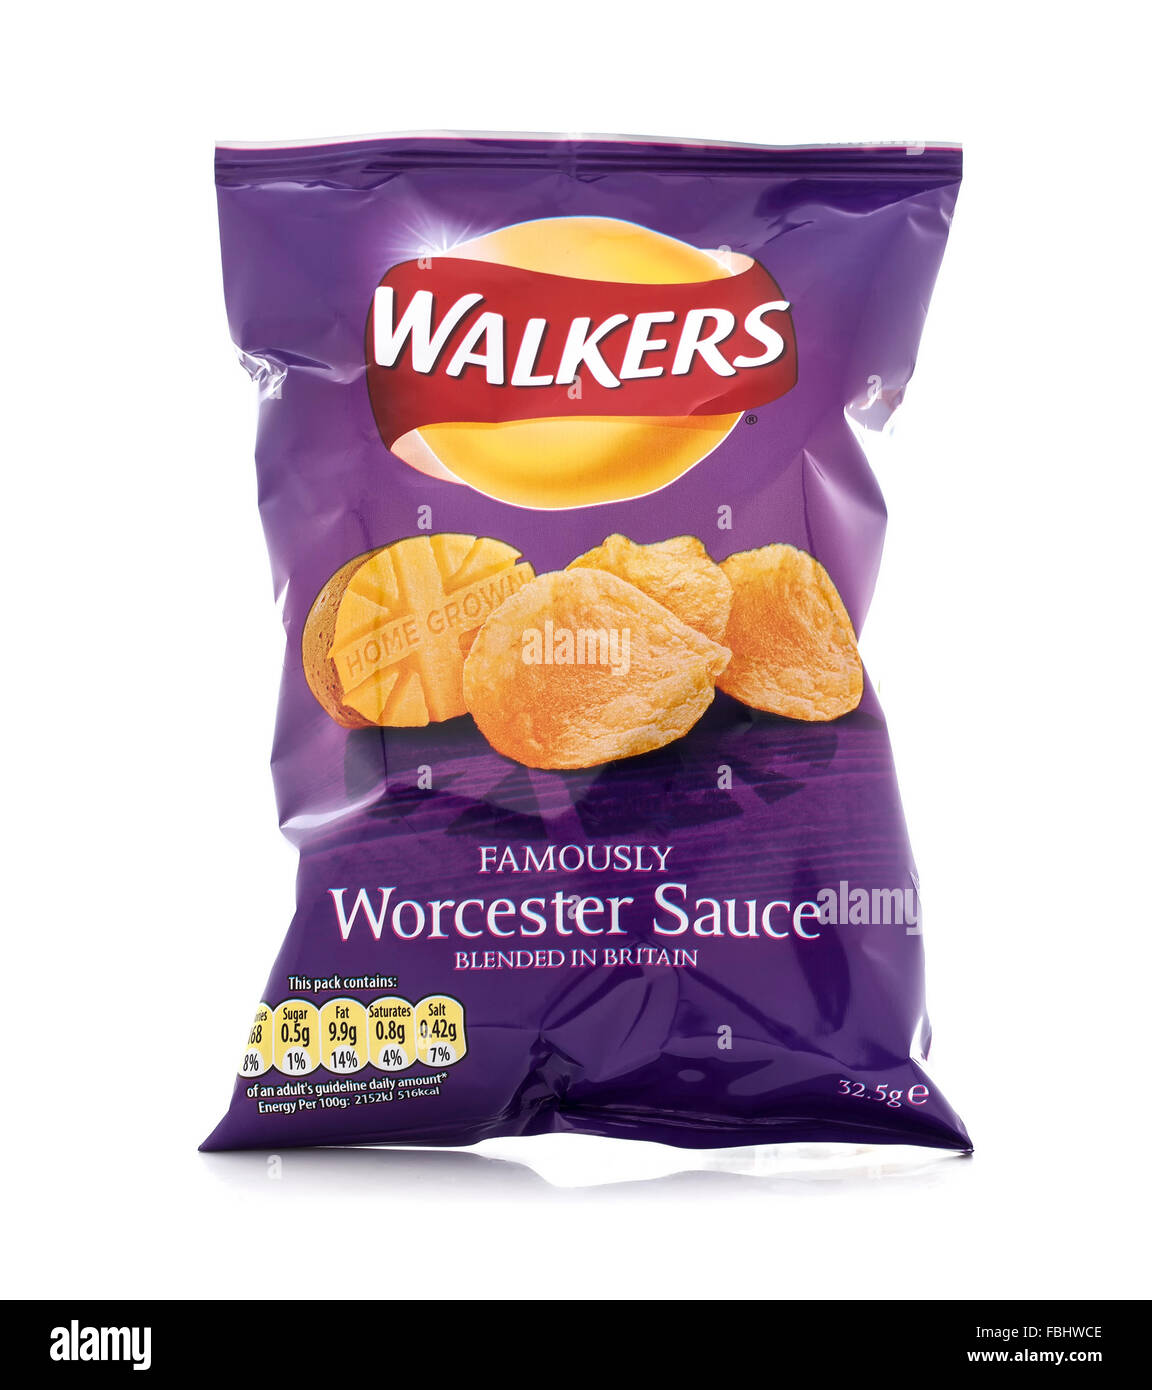 Walkers  Worcester Sauce crisps  isolated on a white background. Walkers is a British snack food manufacturer Stock Photo